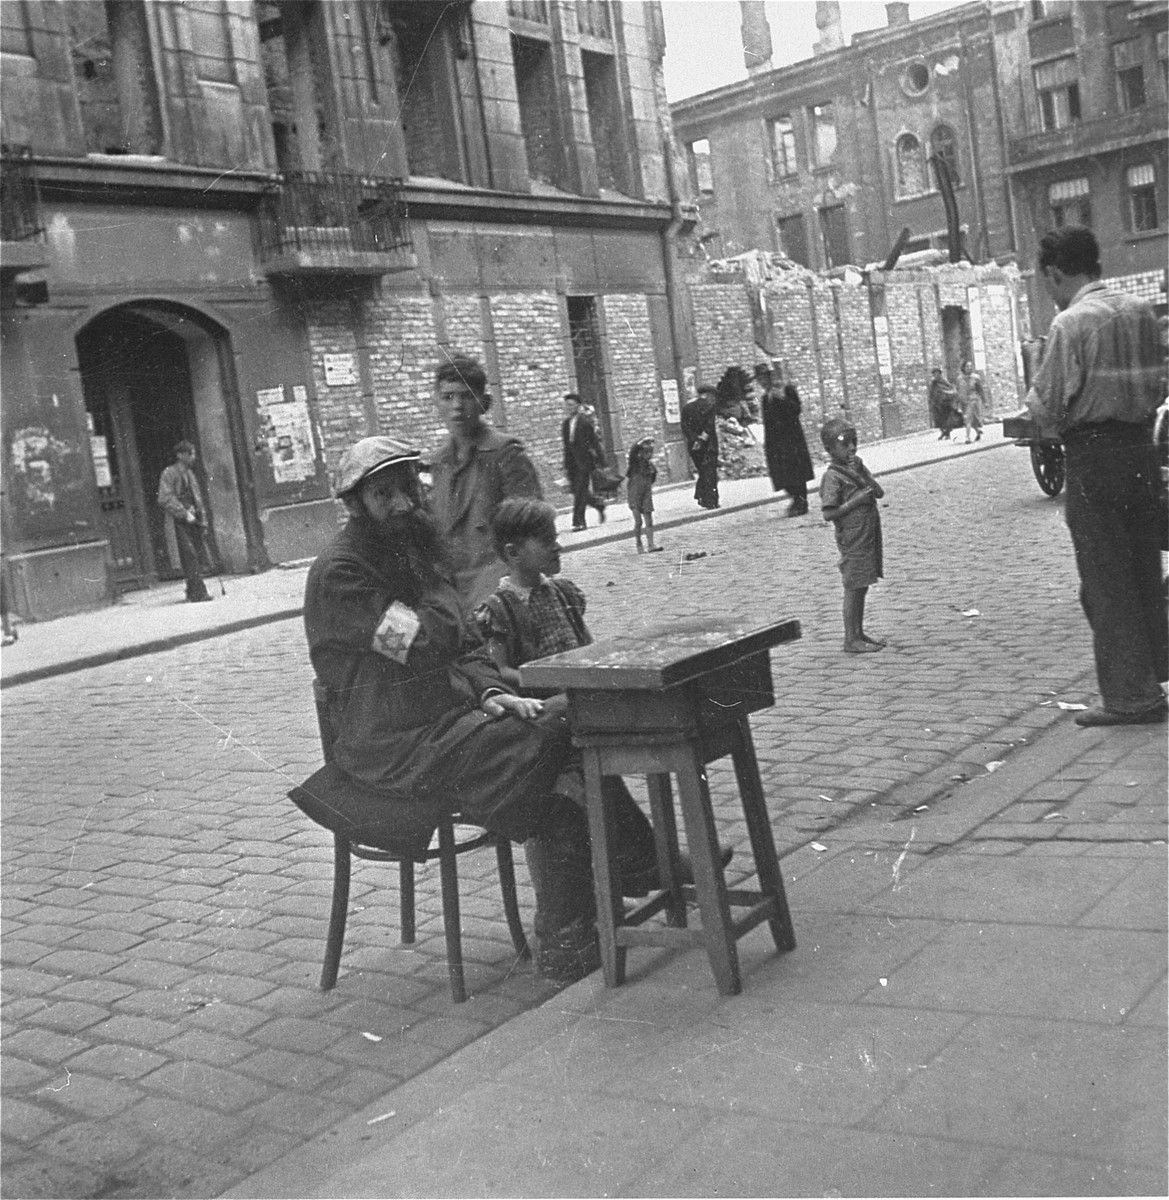 A vendor on the street in the Warsaw ghetto.  

Joest's original caption reads: "This man was selling something.  I don't know more [about it], was it cigarettes?  The fact that small boy was barefoot on this September day again stood out to me."